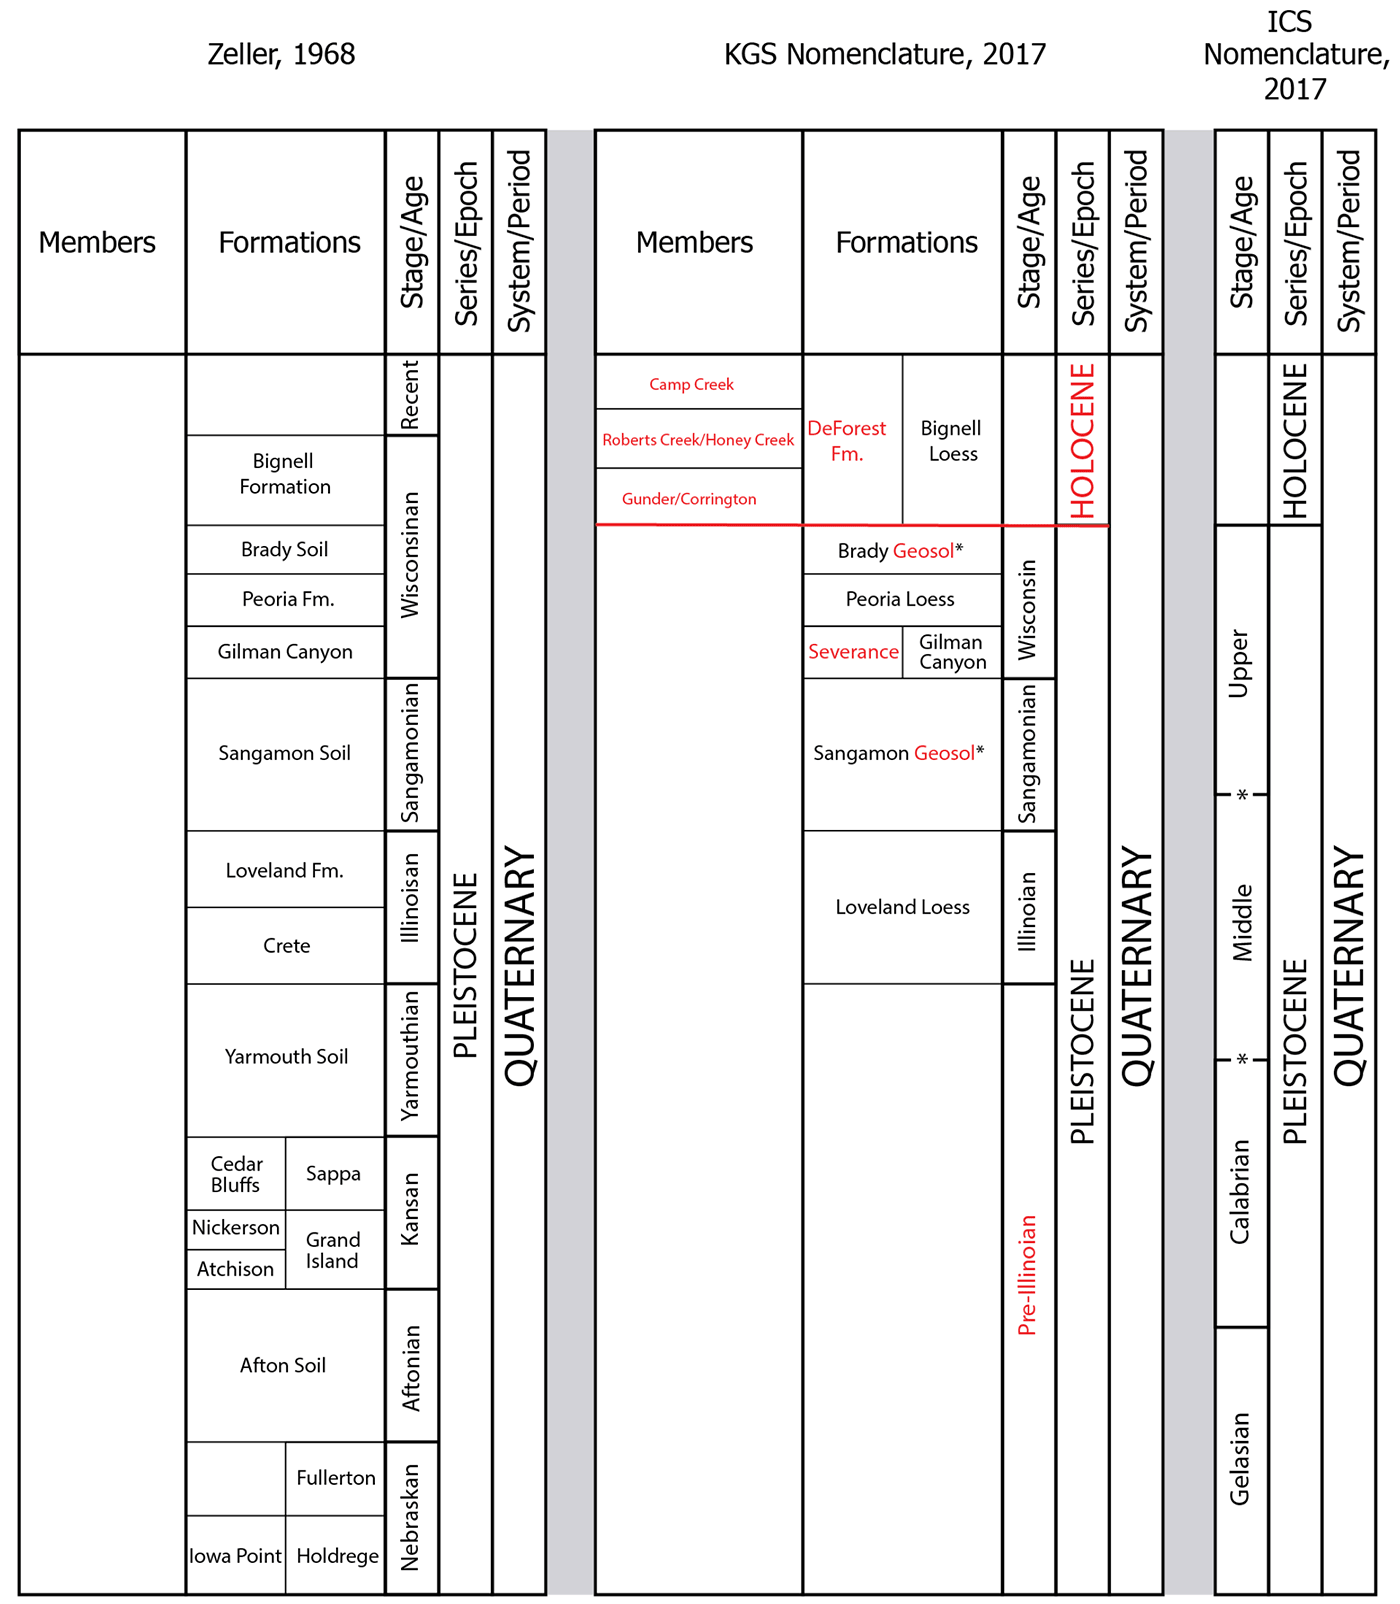 Quaternary nomenclature changes to Zeller (1968) that are now formally adopted by the Kansas Geological Survey.